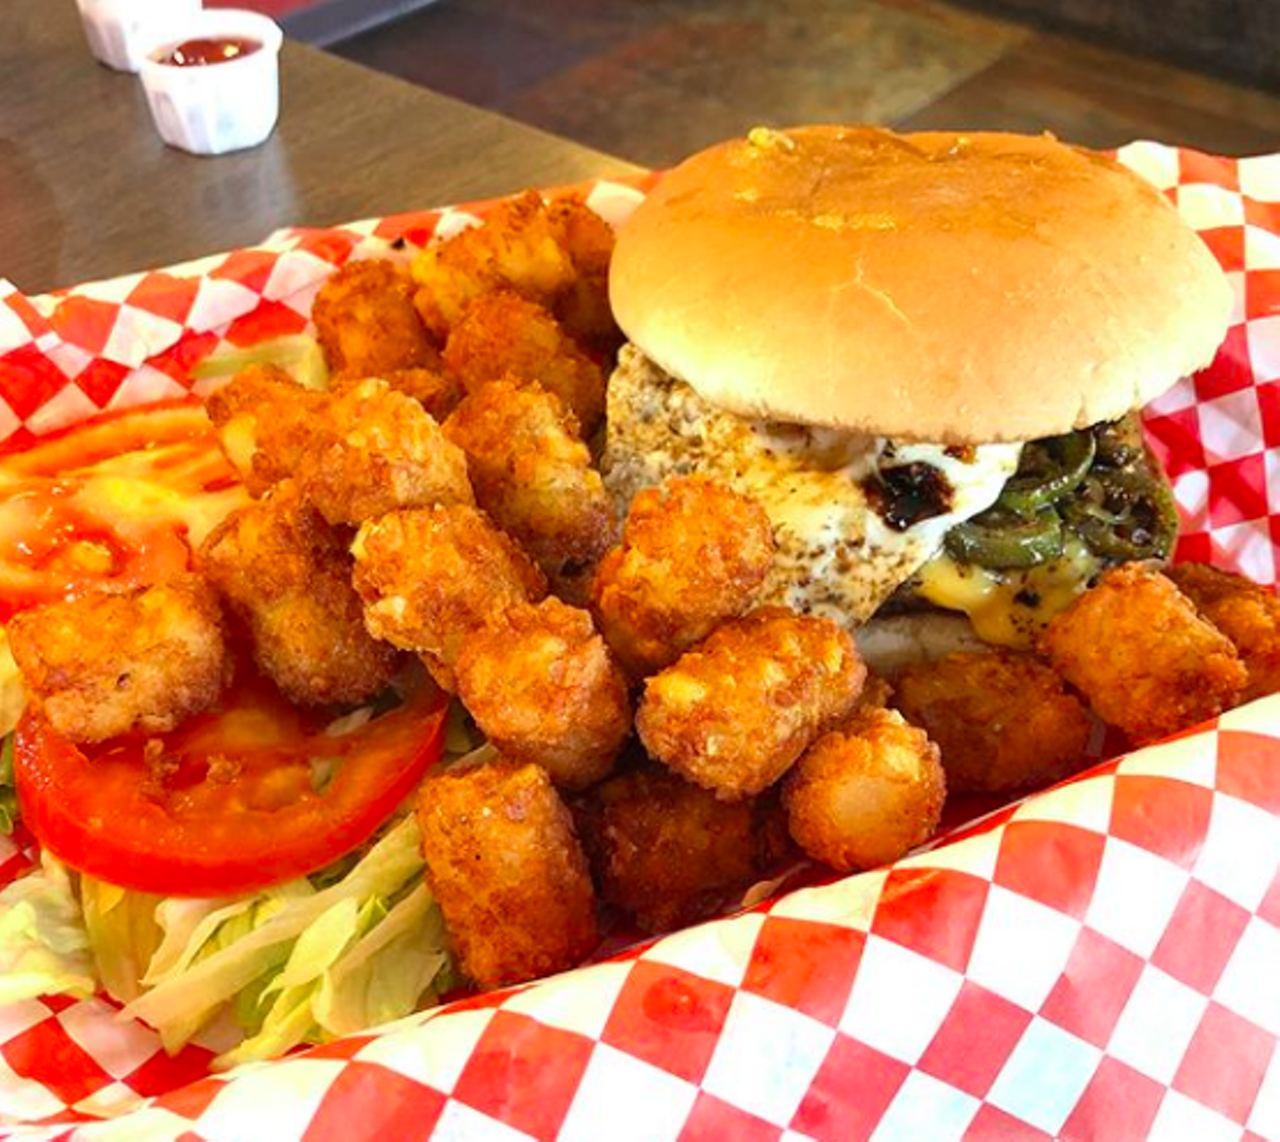 Kenny’s Burgers
1927 Goliad Road, (210) 337-1355, kennysburgers.com
This low key spot makes greasy burgers that hit the spot whenever you need something scrumptious, plus fries, tots, onion rings and even sweet potato fries. Yup, you don’t want to ignore this spot.
Photo via Instagram / tog218